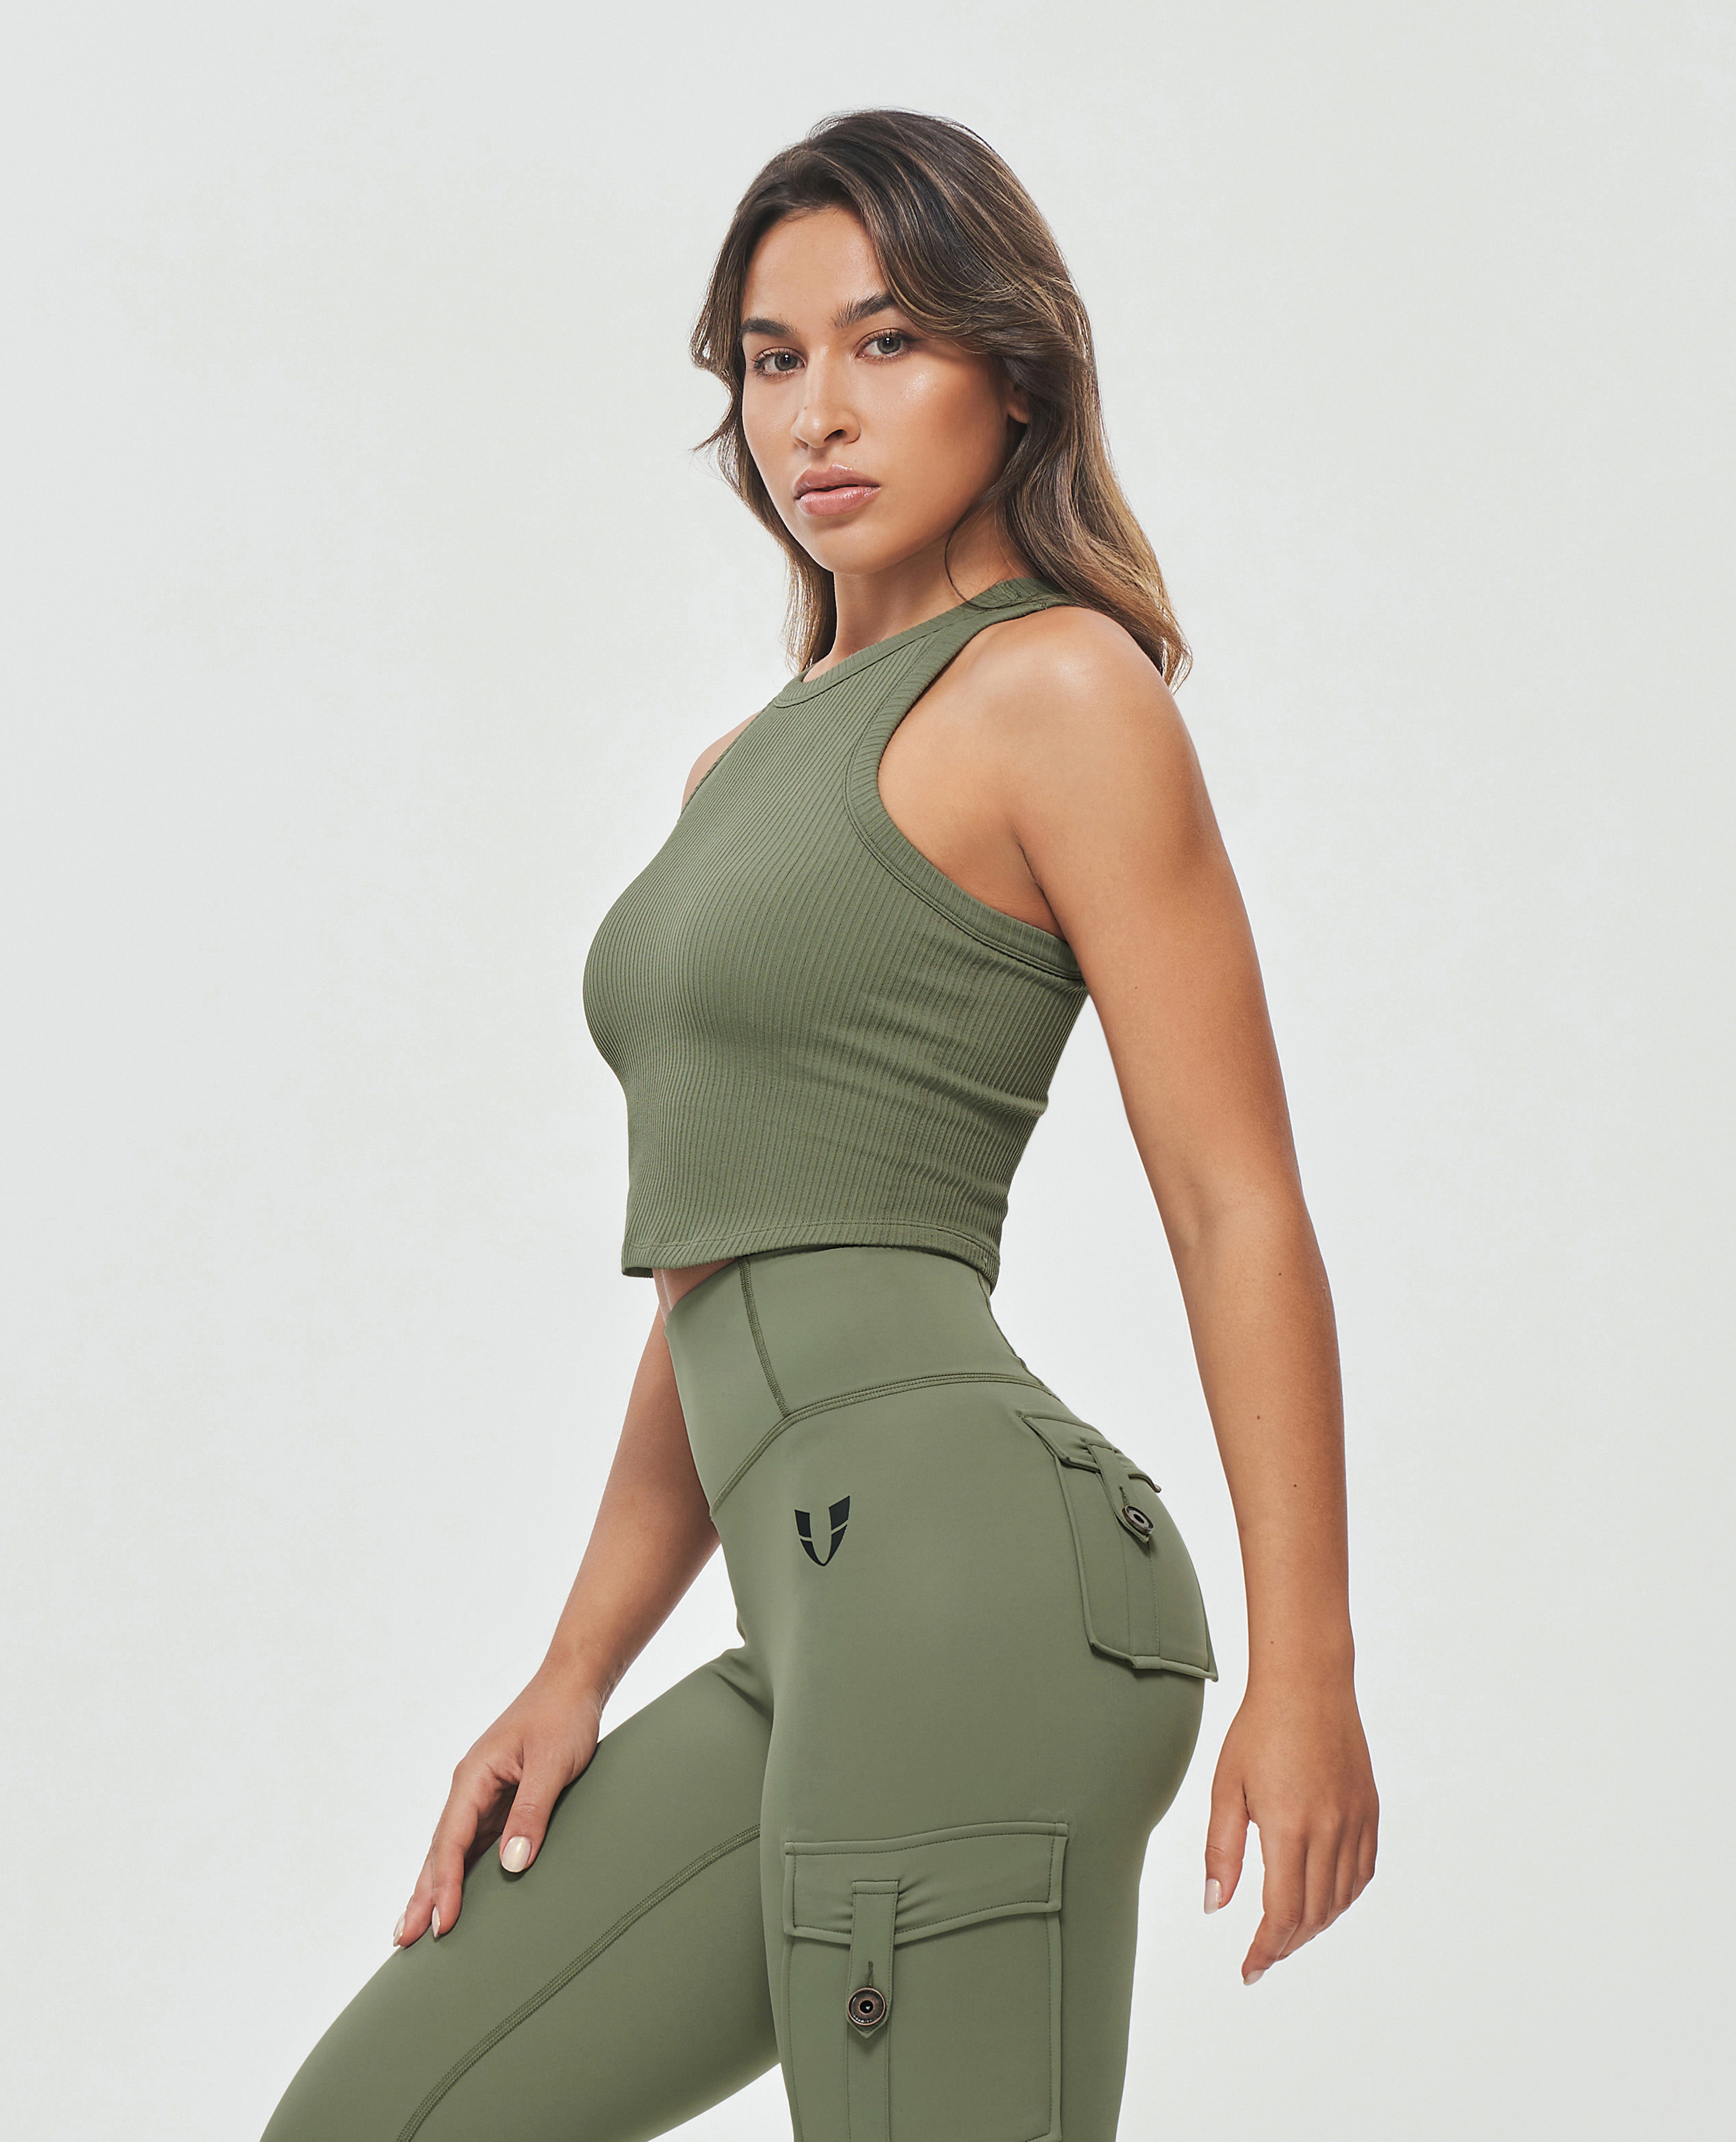 Padded Workout Tank - Olive Green